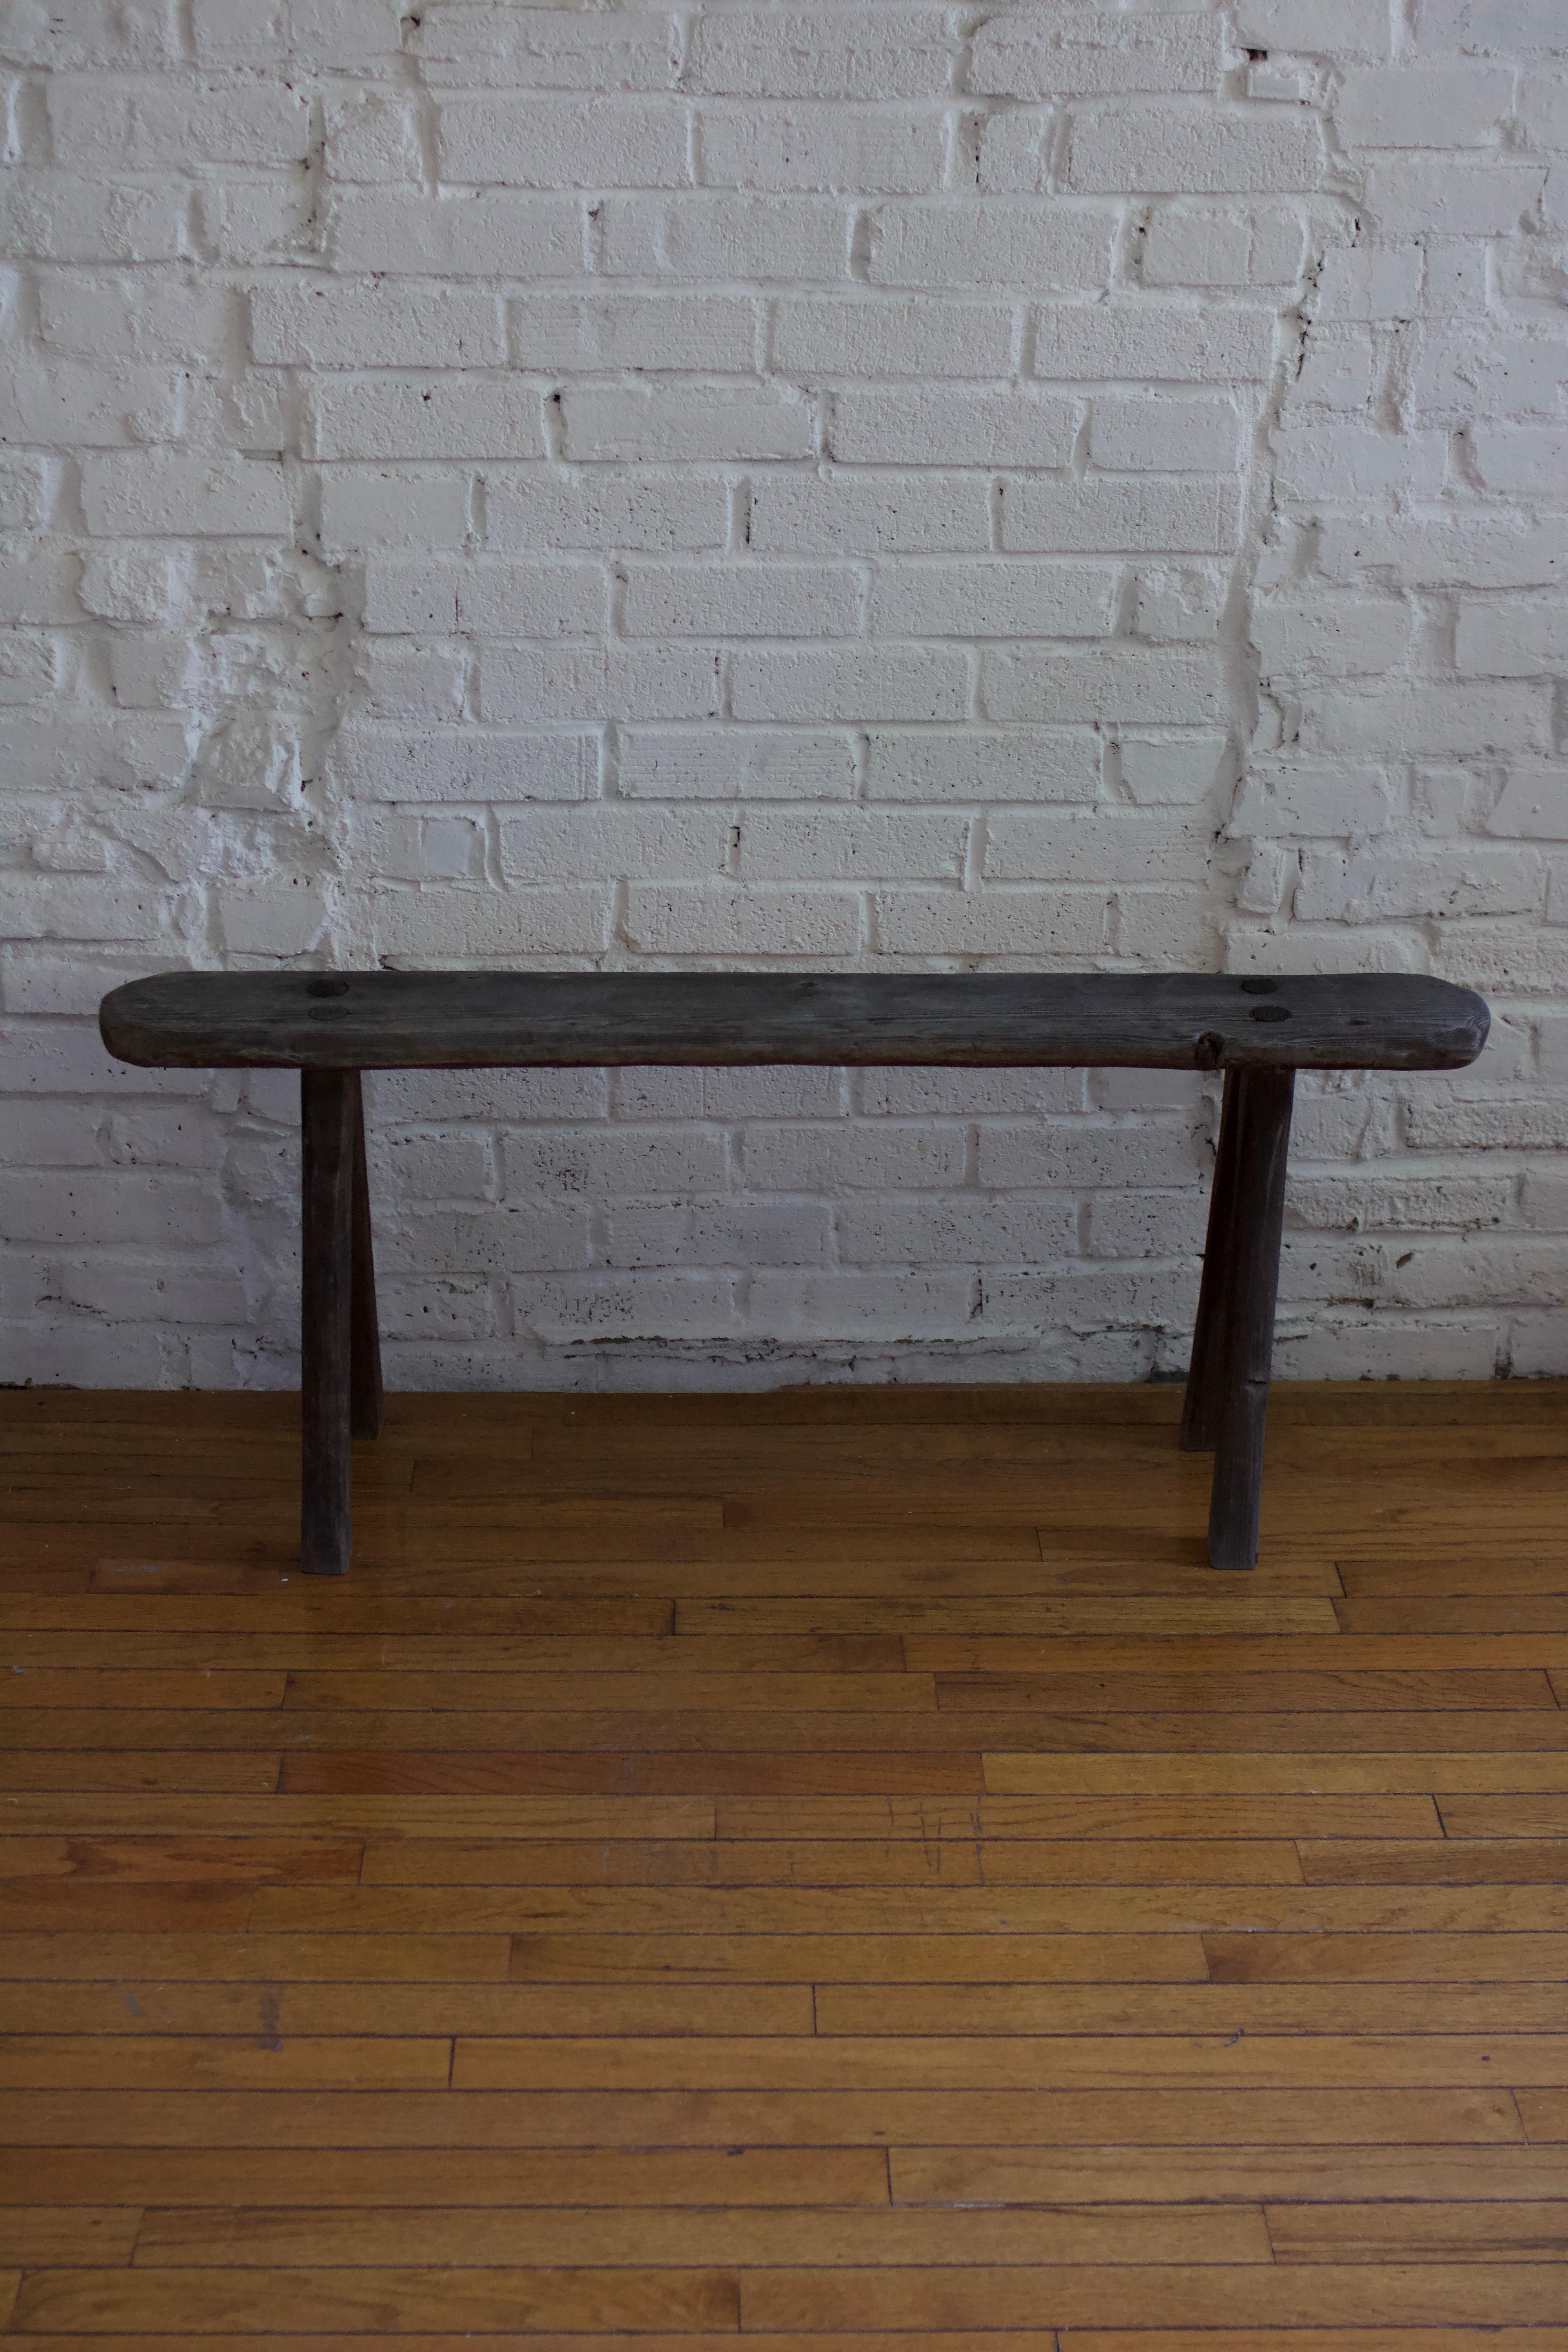 Unknown 19th Century Rustic Pine Bench